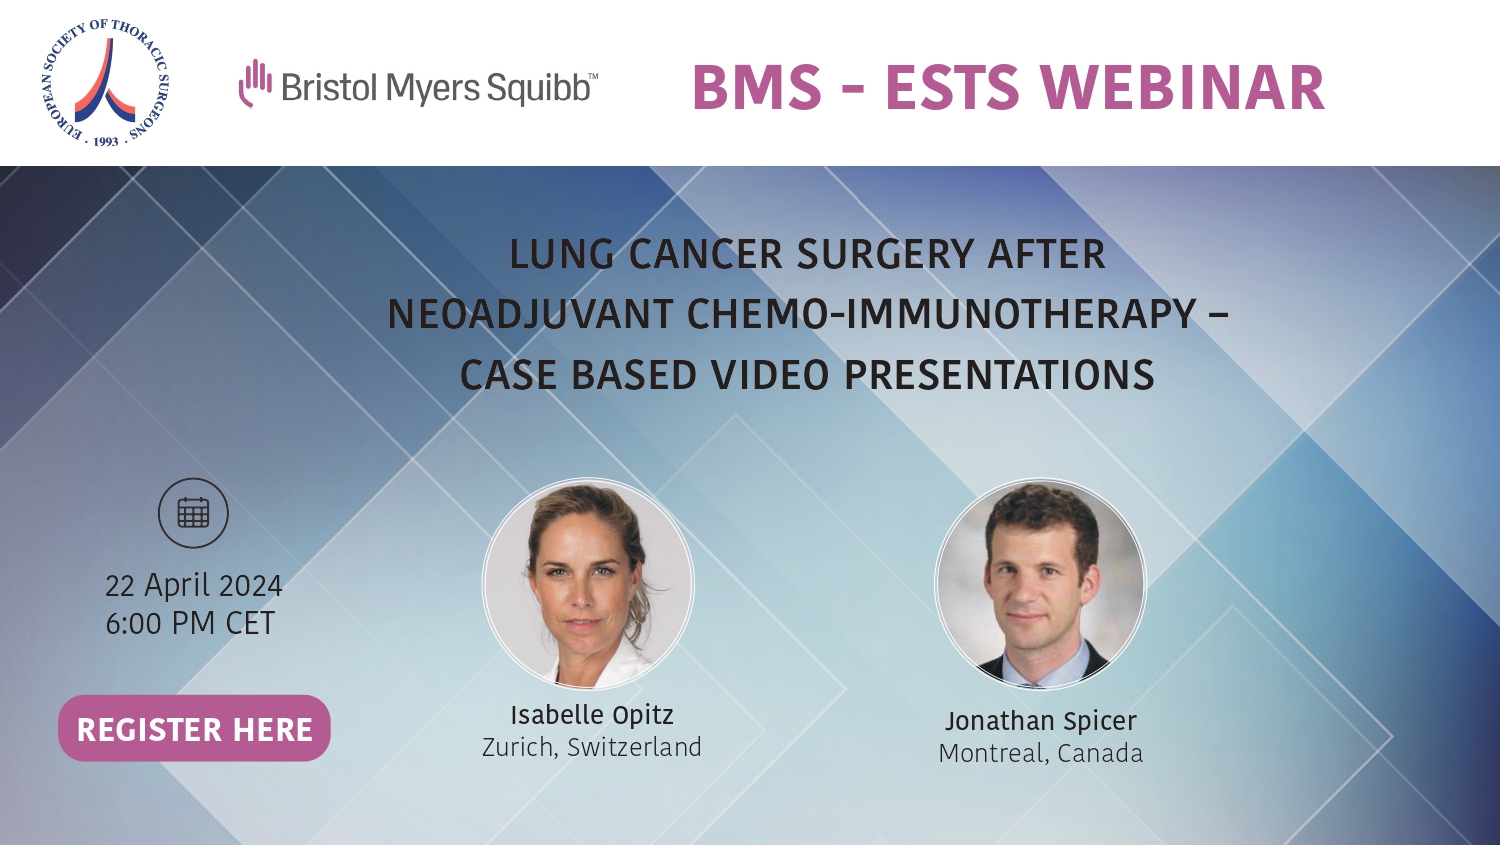 Monday 3 June: Register for the ESTS-BMS Webinar: Lung Cancer Surgery after Neoadjuvant Chemo-Immunotherapy image